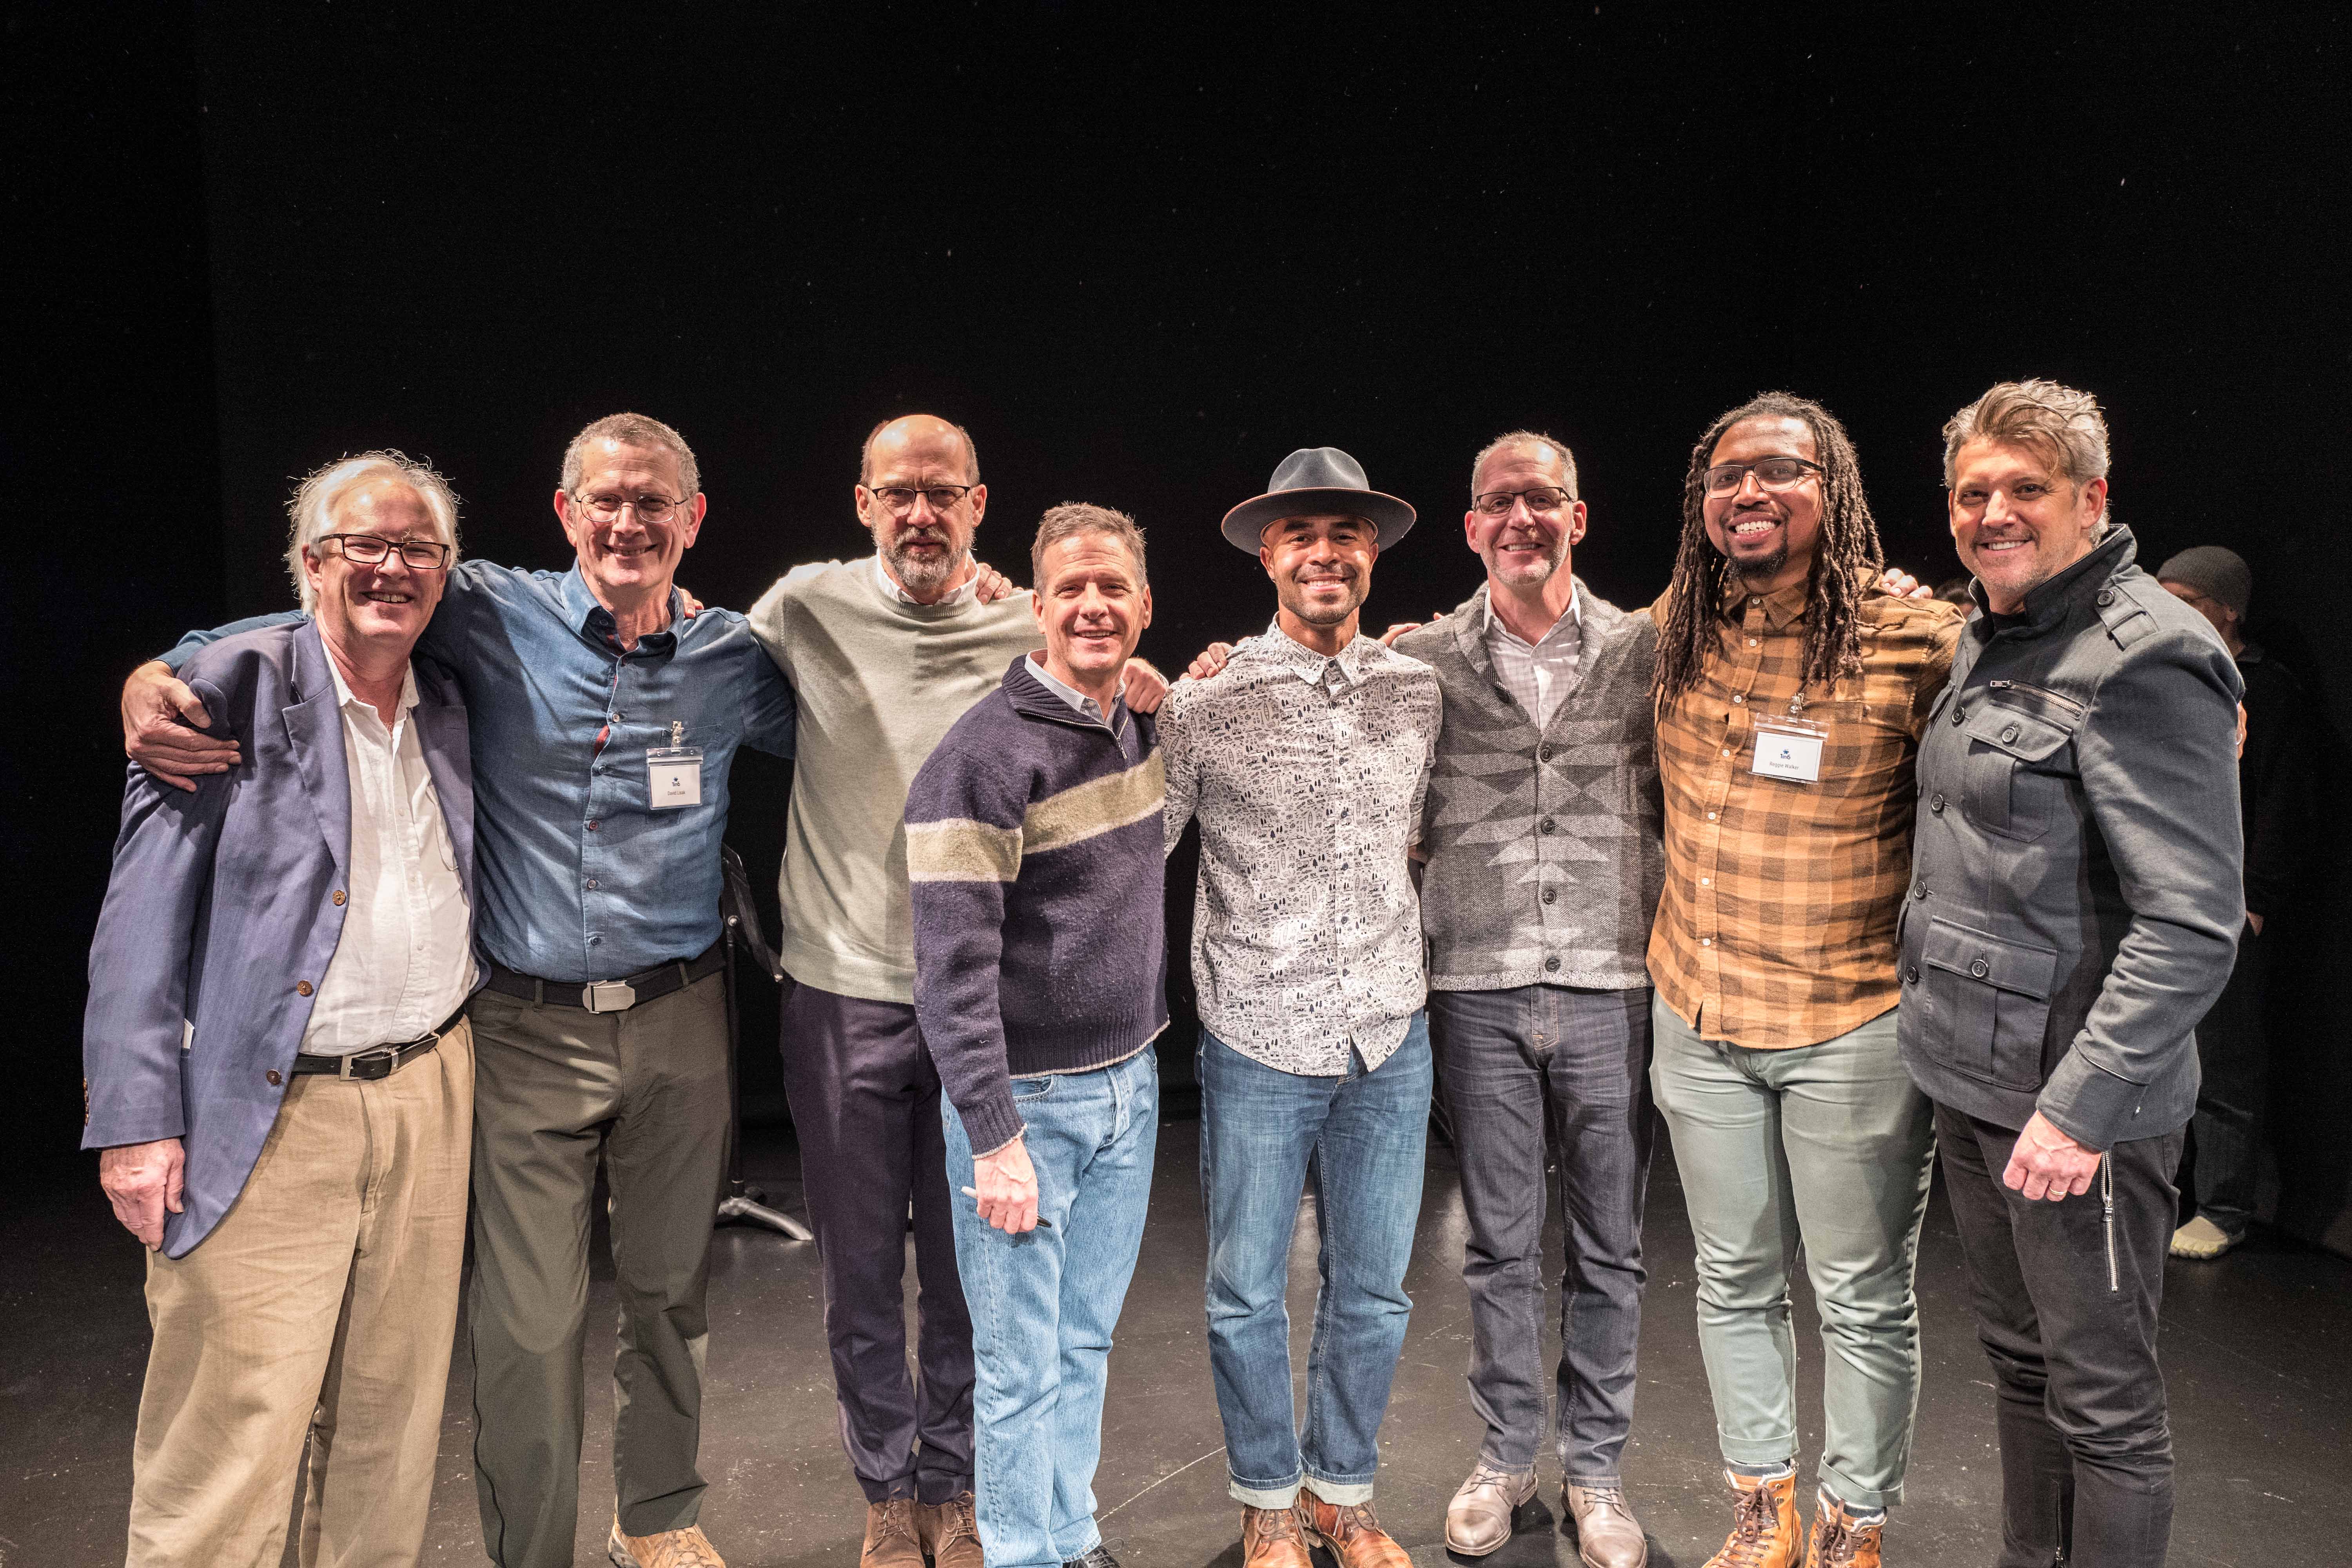 After the evening's performance, several audience members—all participants in 1in6's Bristlecone Project—gathered on stage. Pictured left to right: Peter Pollard, Dr. David Lisak, Anthony Edwards, Mar